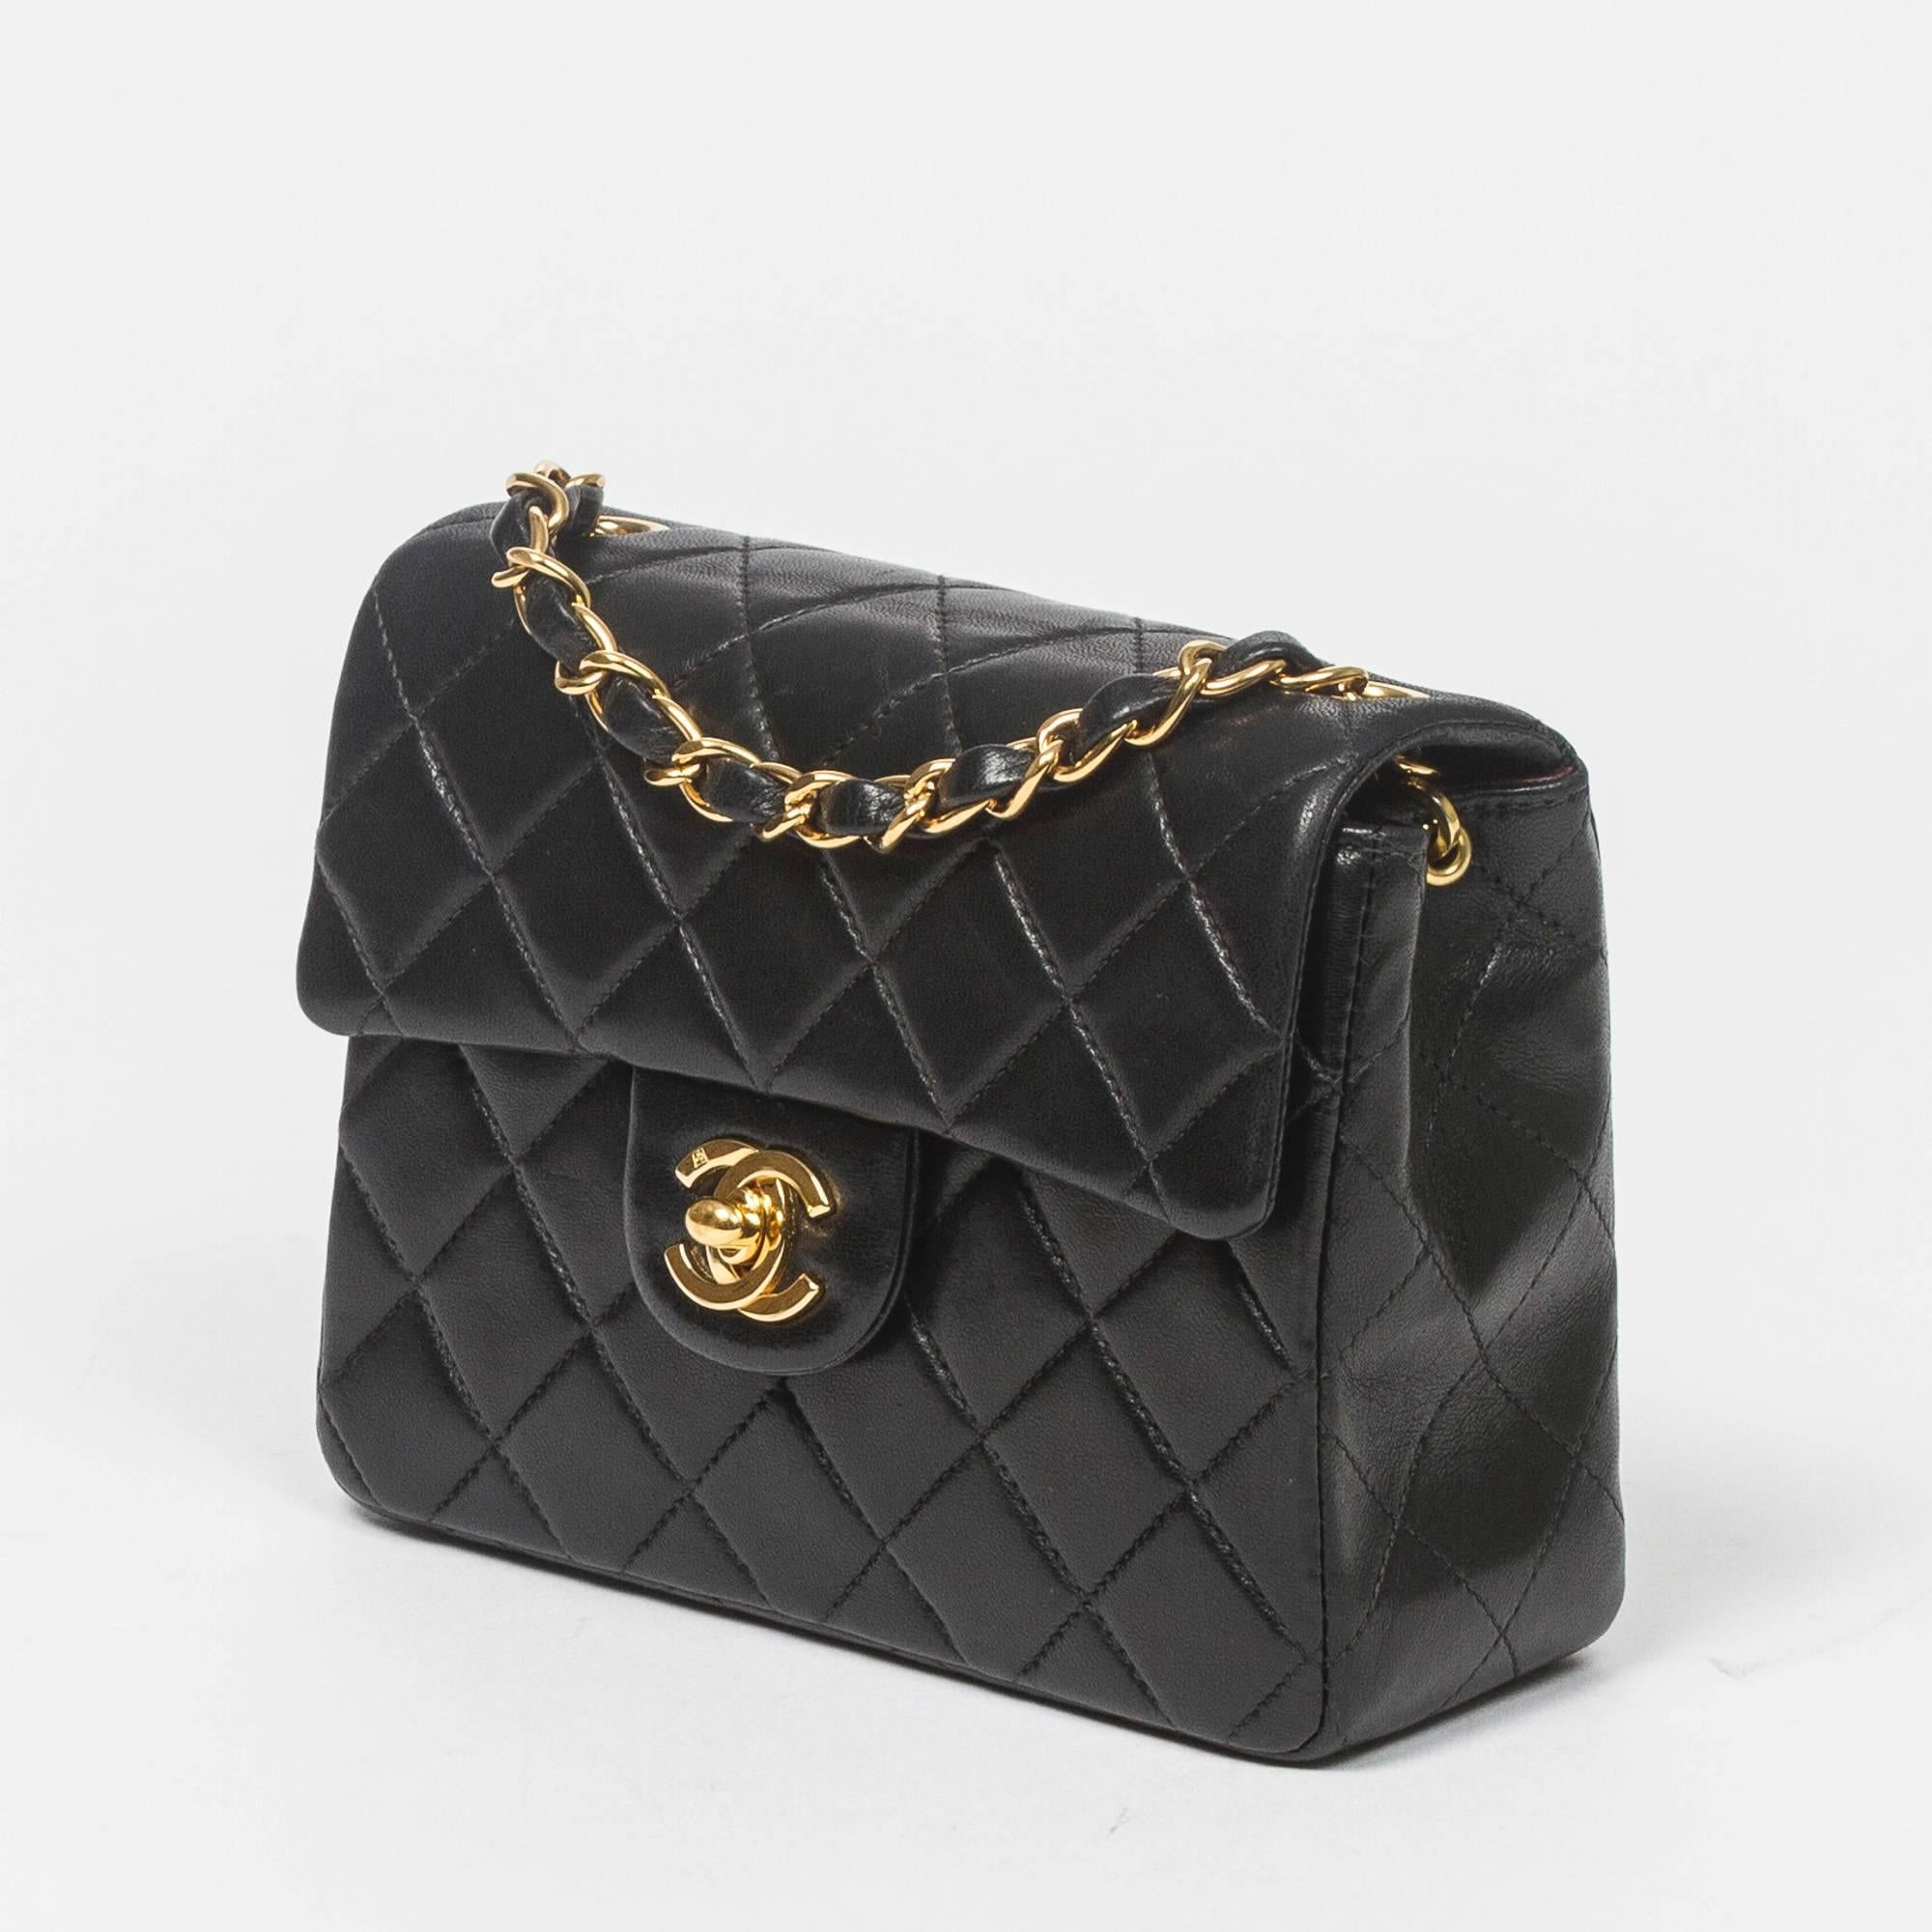 Classic Mini Flap in black quilted lambskin with chain strap interlaced with leather, gold tone CC turnlock. Back slip pocket. Burgundy leather lined interior with one slip and one zip pocket. Gold tone 